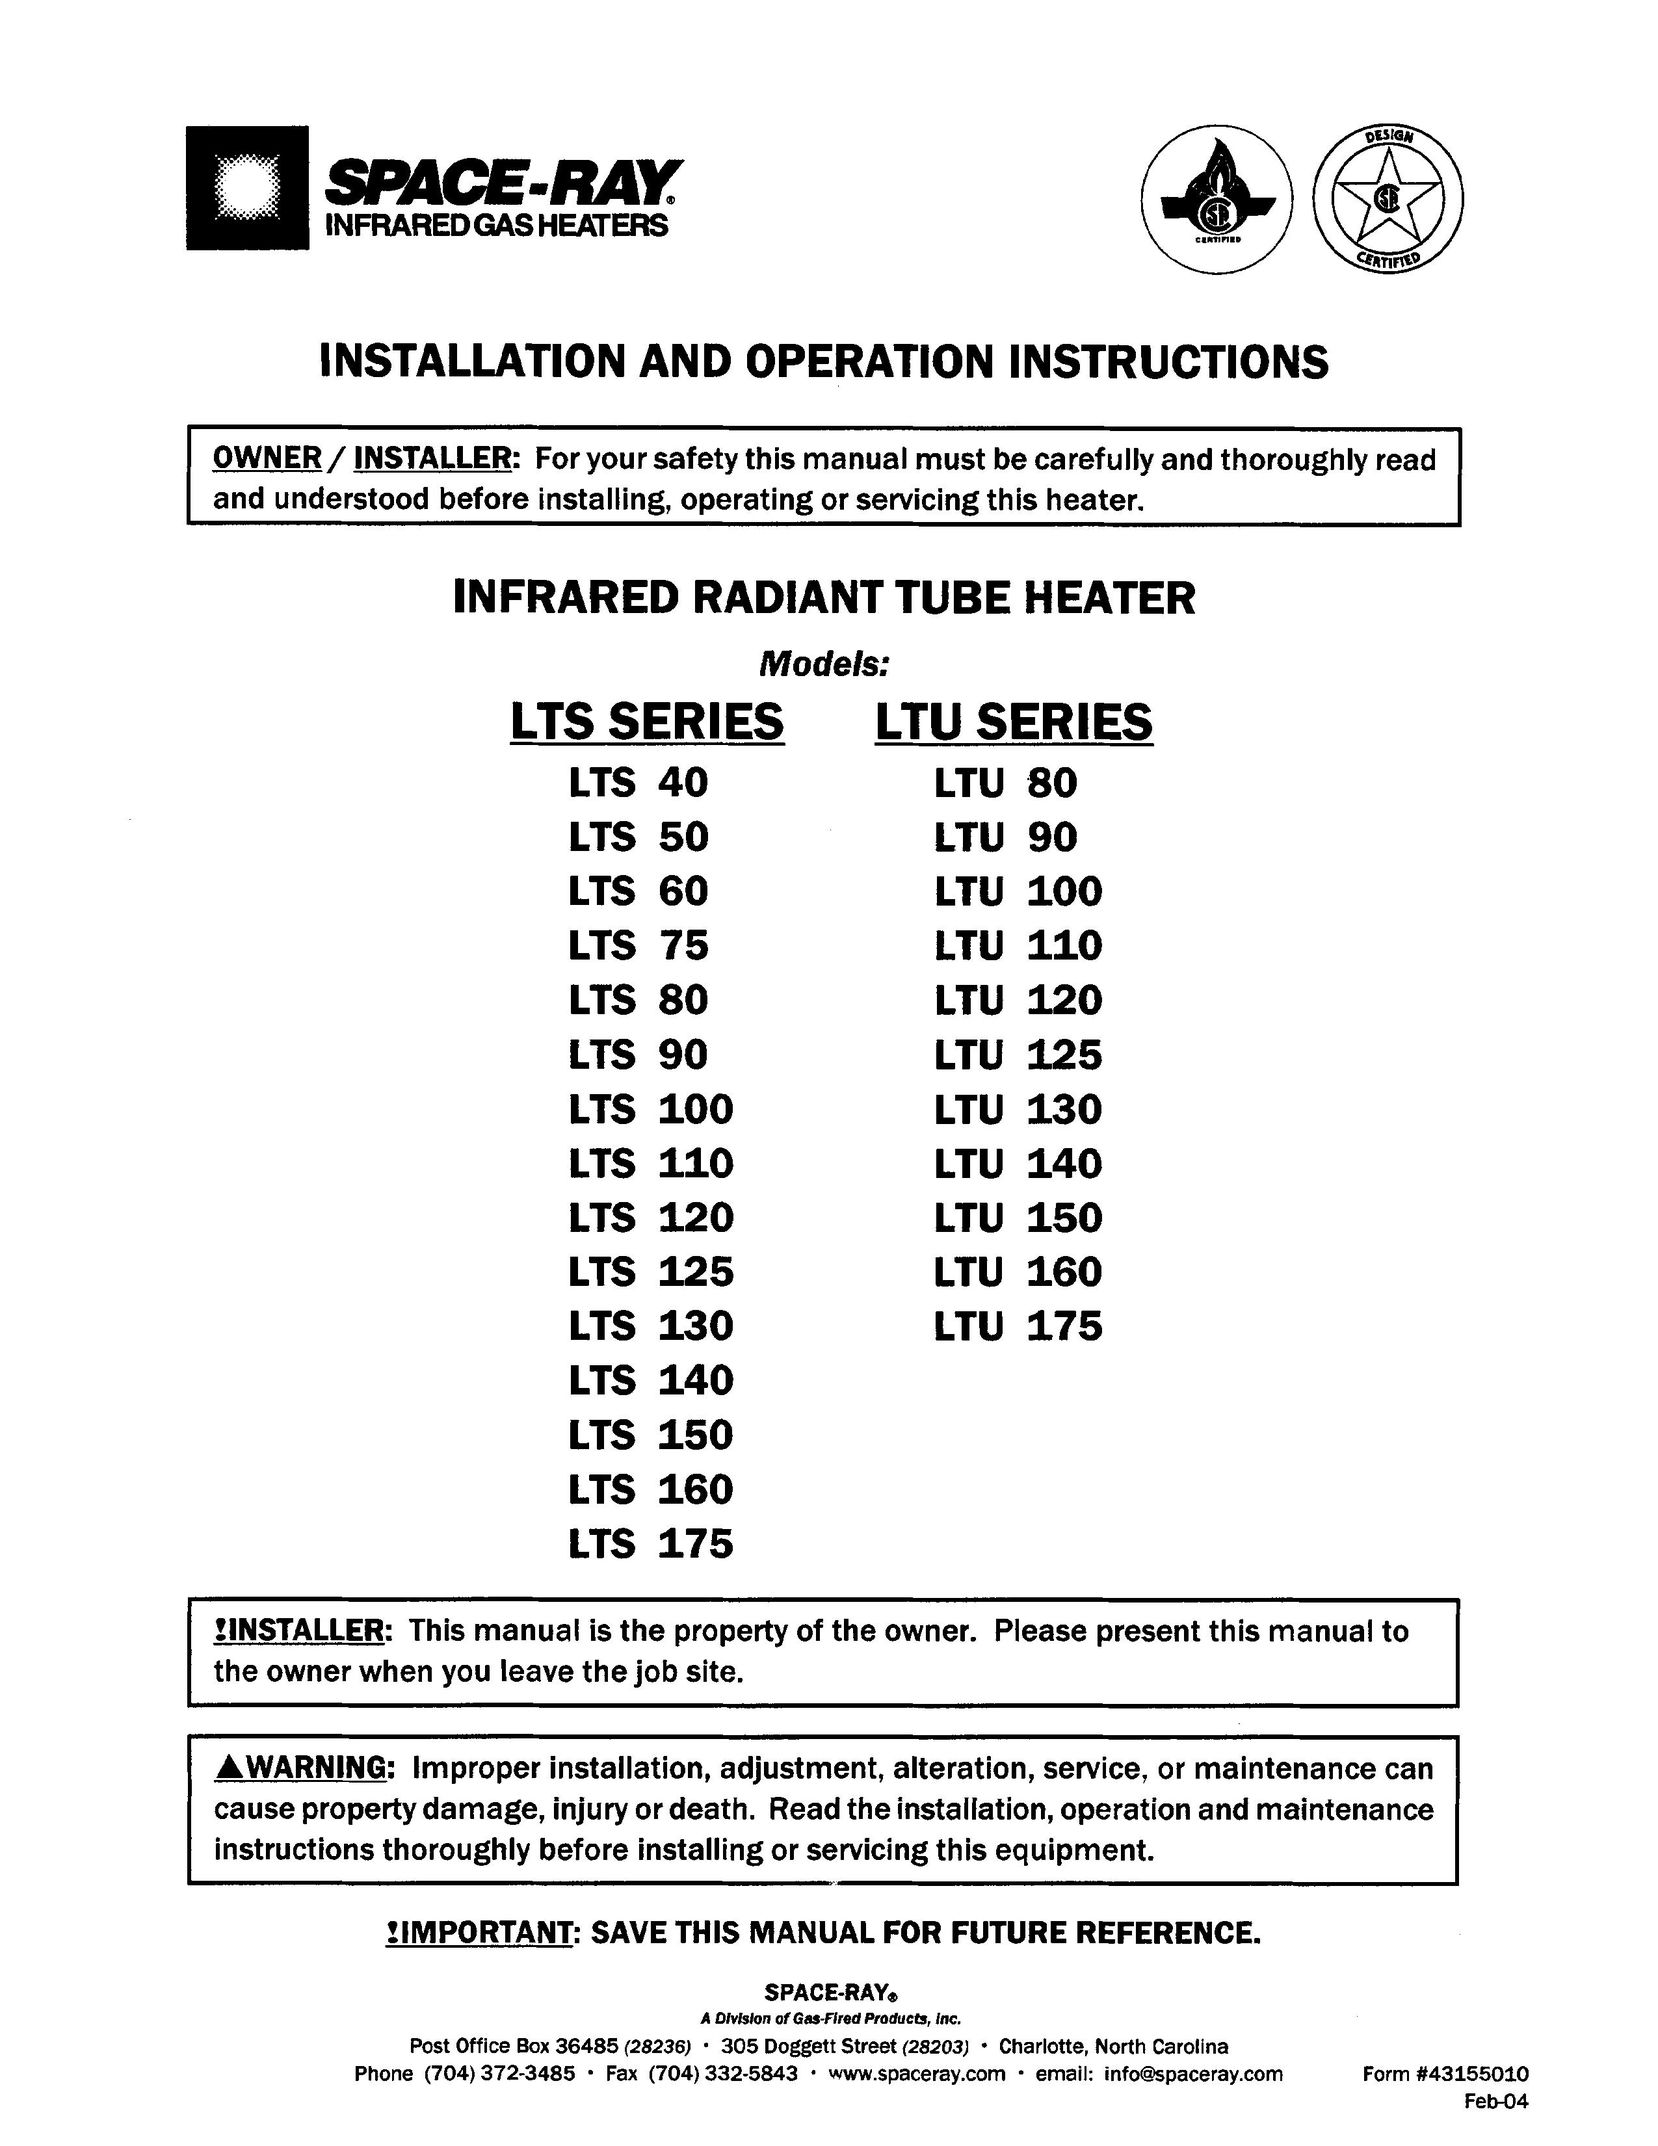 Gas-Fired Products LTS 110 Electric Heater User Manual